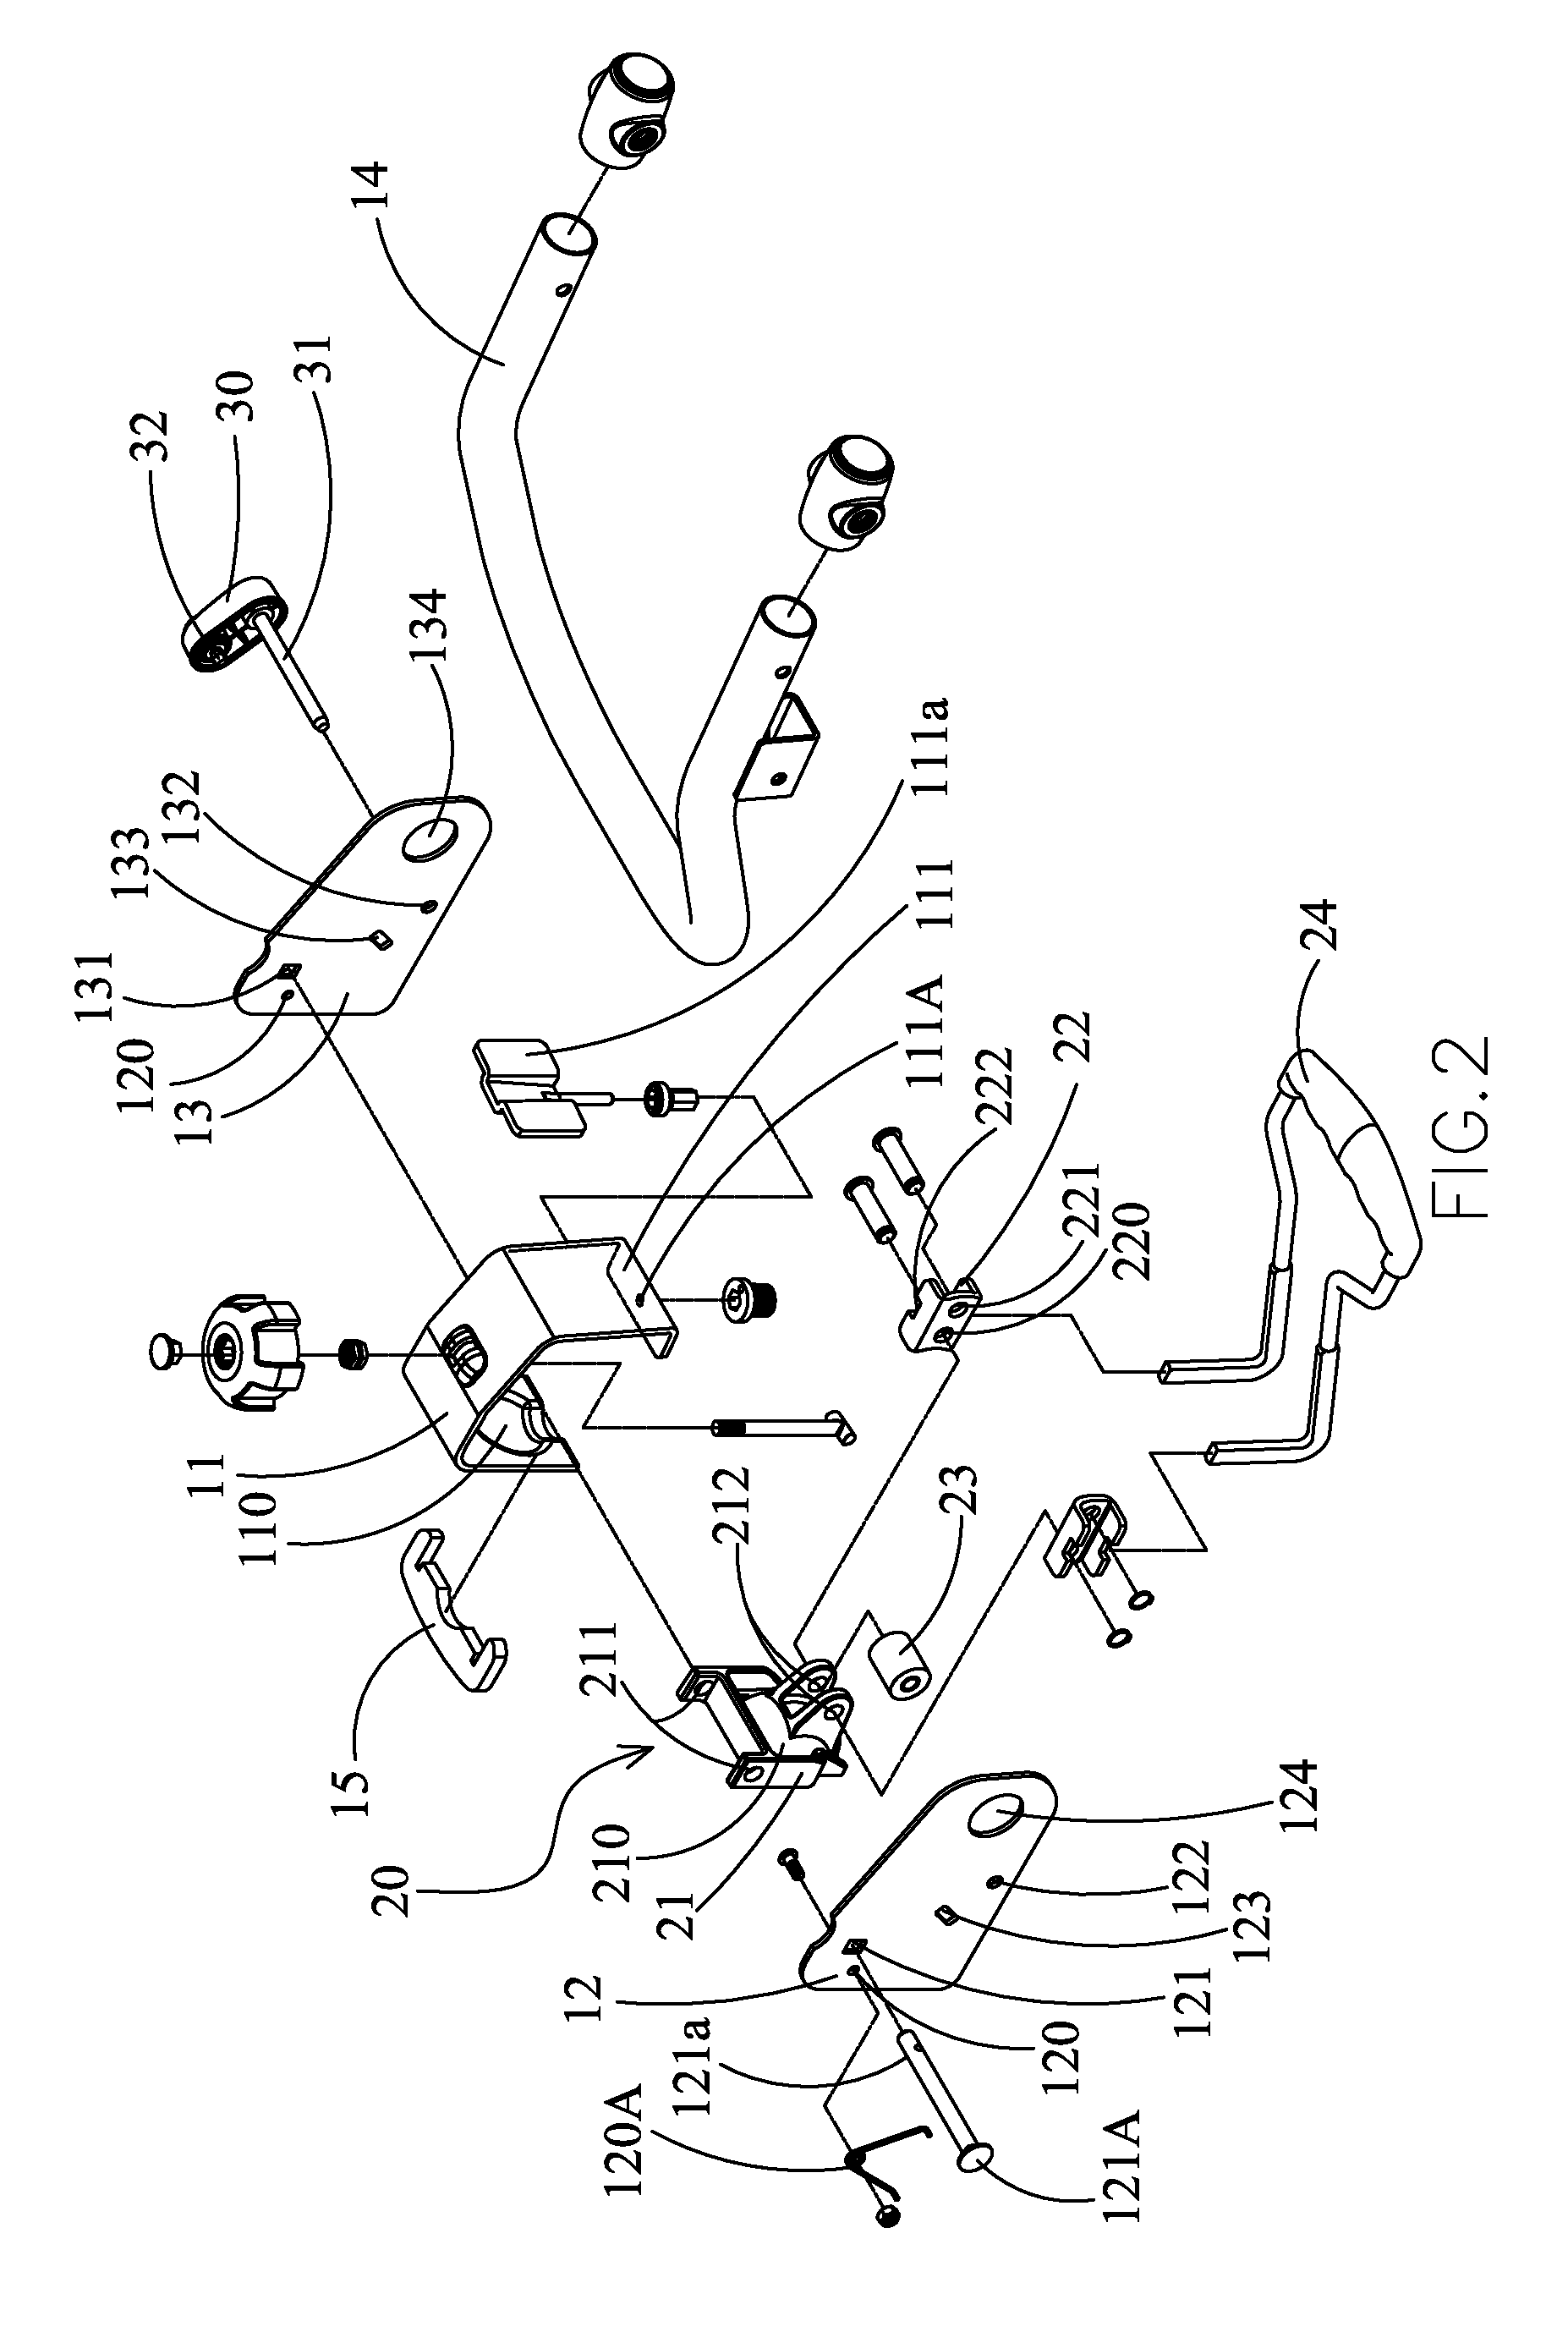 Coupling Device for Connecting Bicycle Rack to Hitch Ball